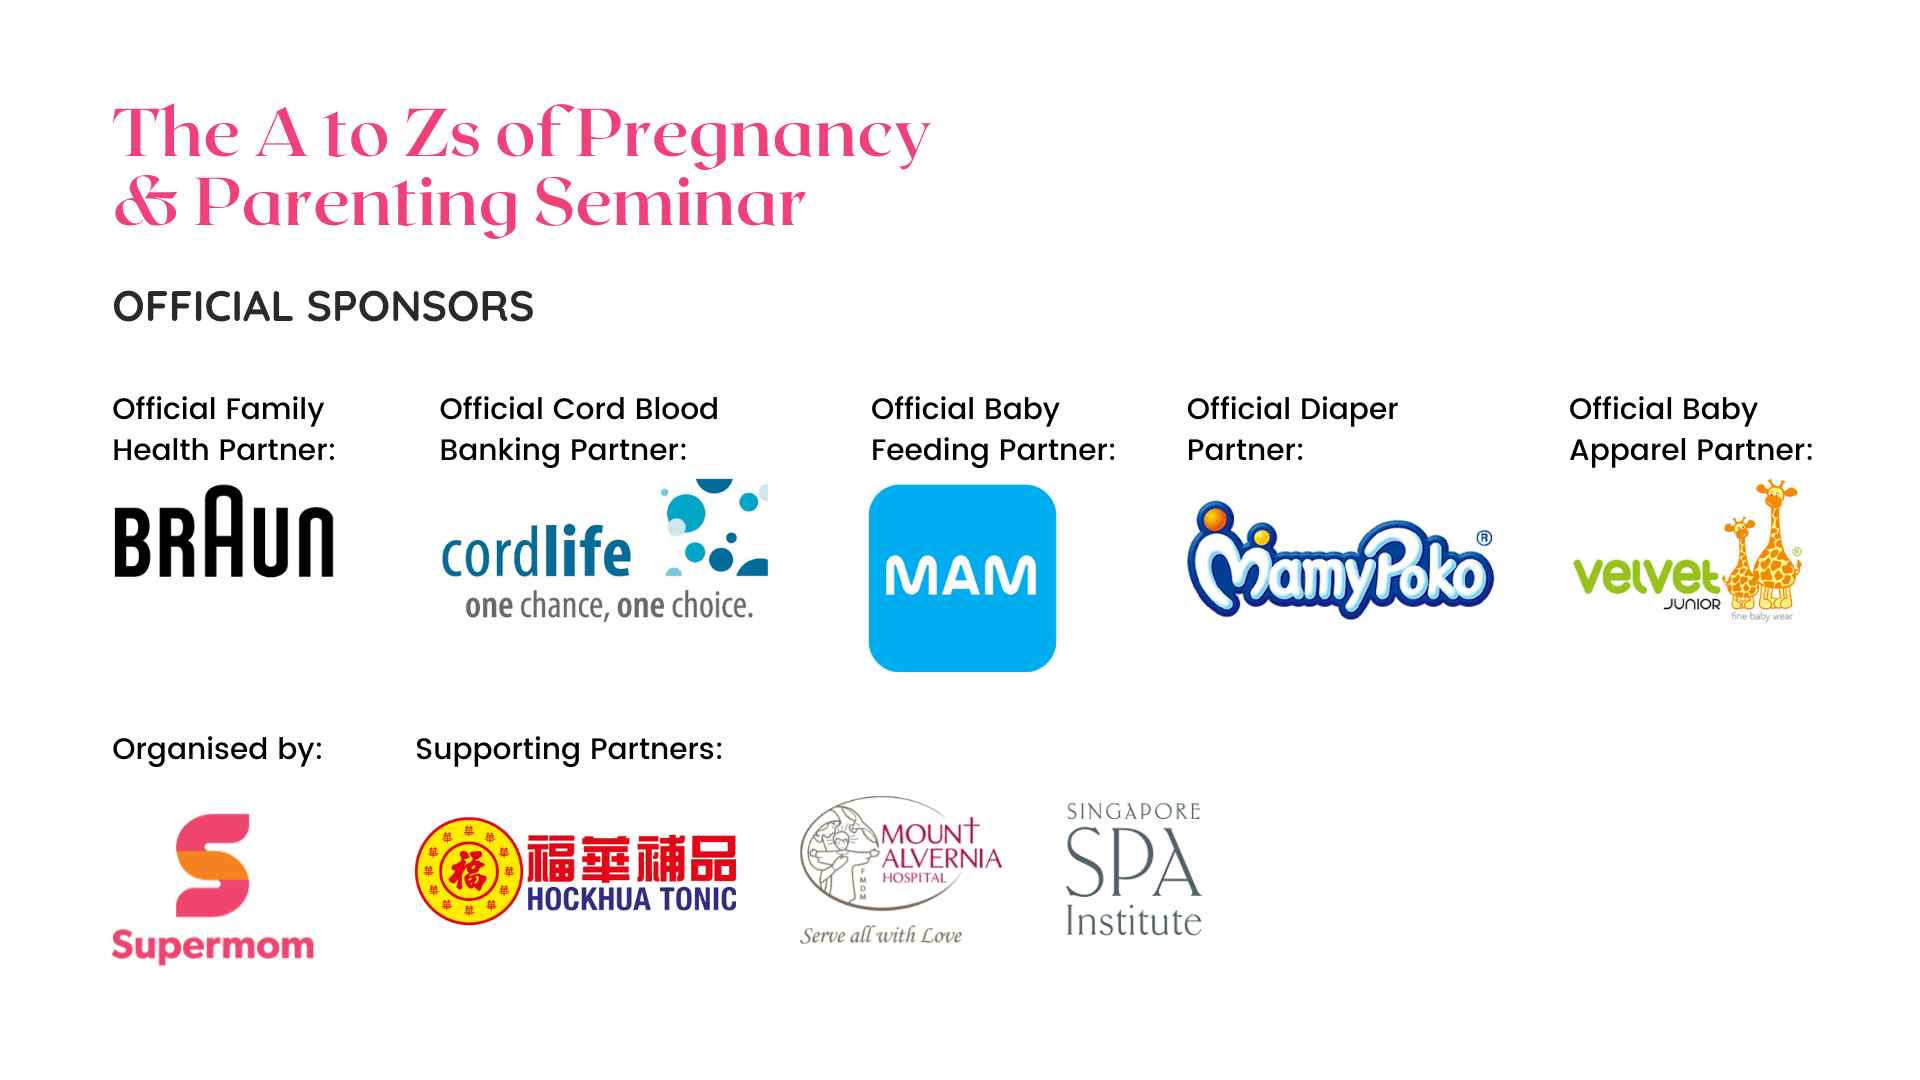 The A to Zs of Pregnancy & Parenting Seminar